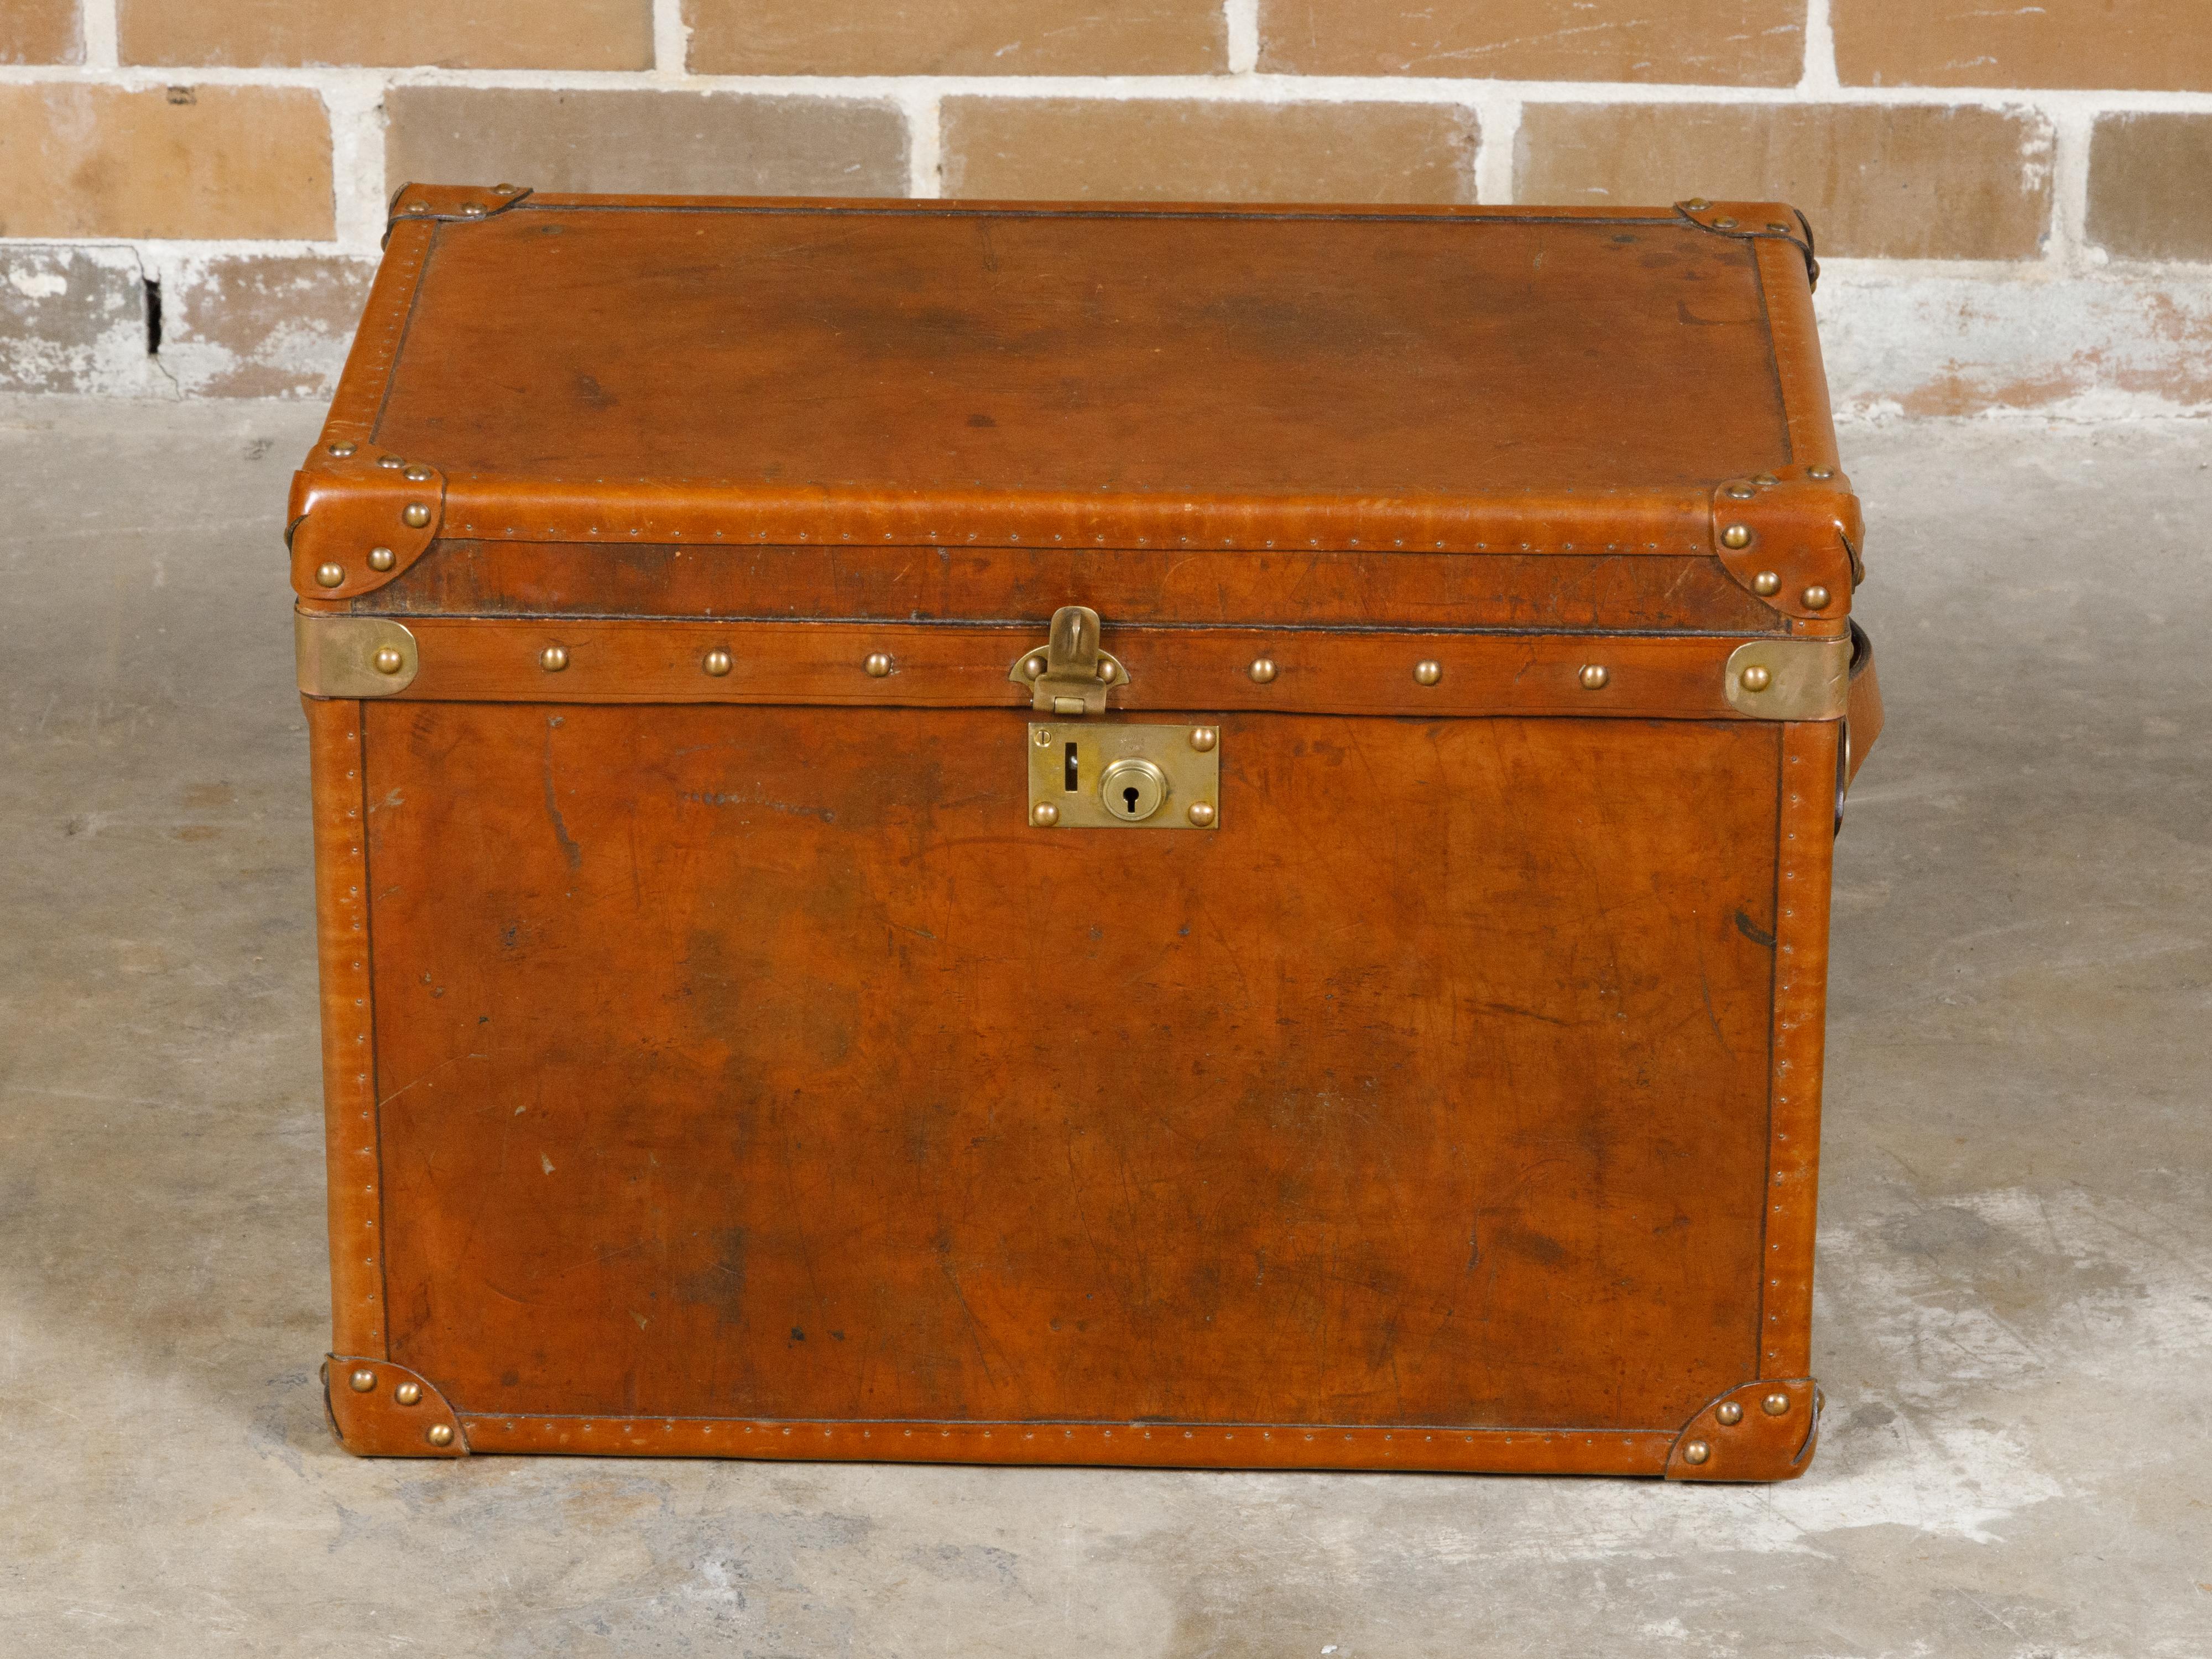 An English Victorian period brown leather trunk from the 19th century with brass accents and lateral handles. This 19th-century English Victorian brown leather trunk embodies the elegance and robustness of its era, adorned with brass accents that